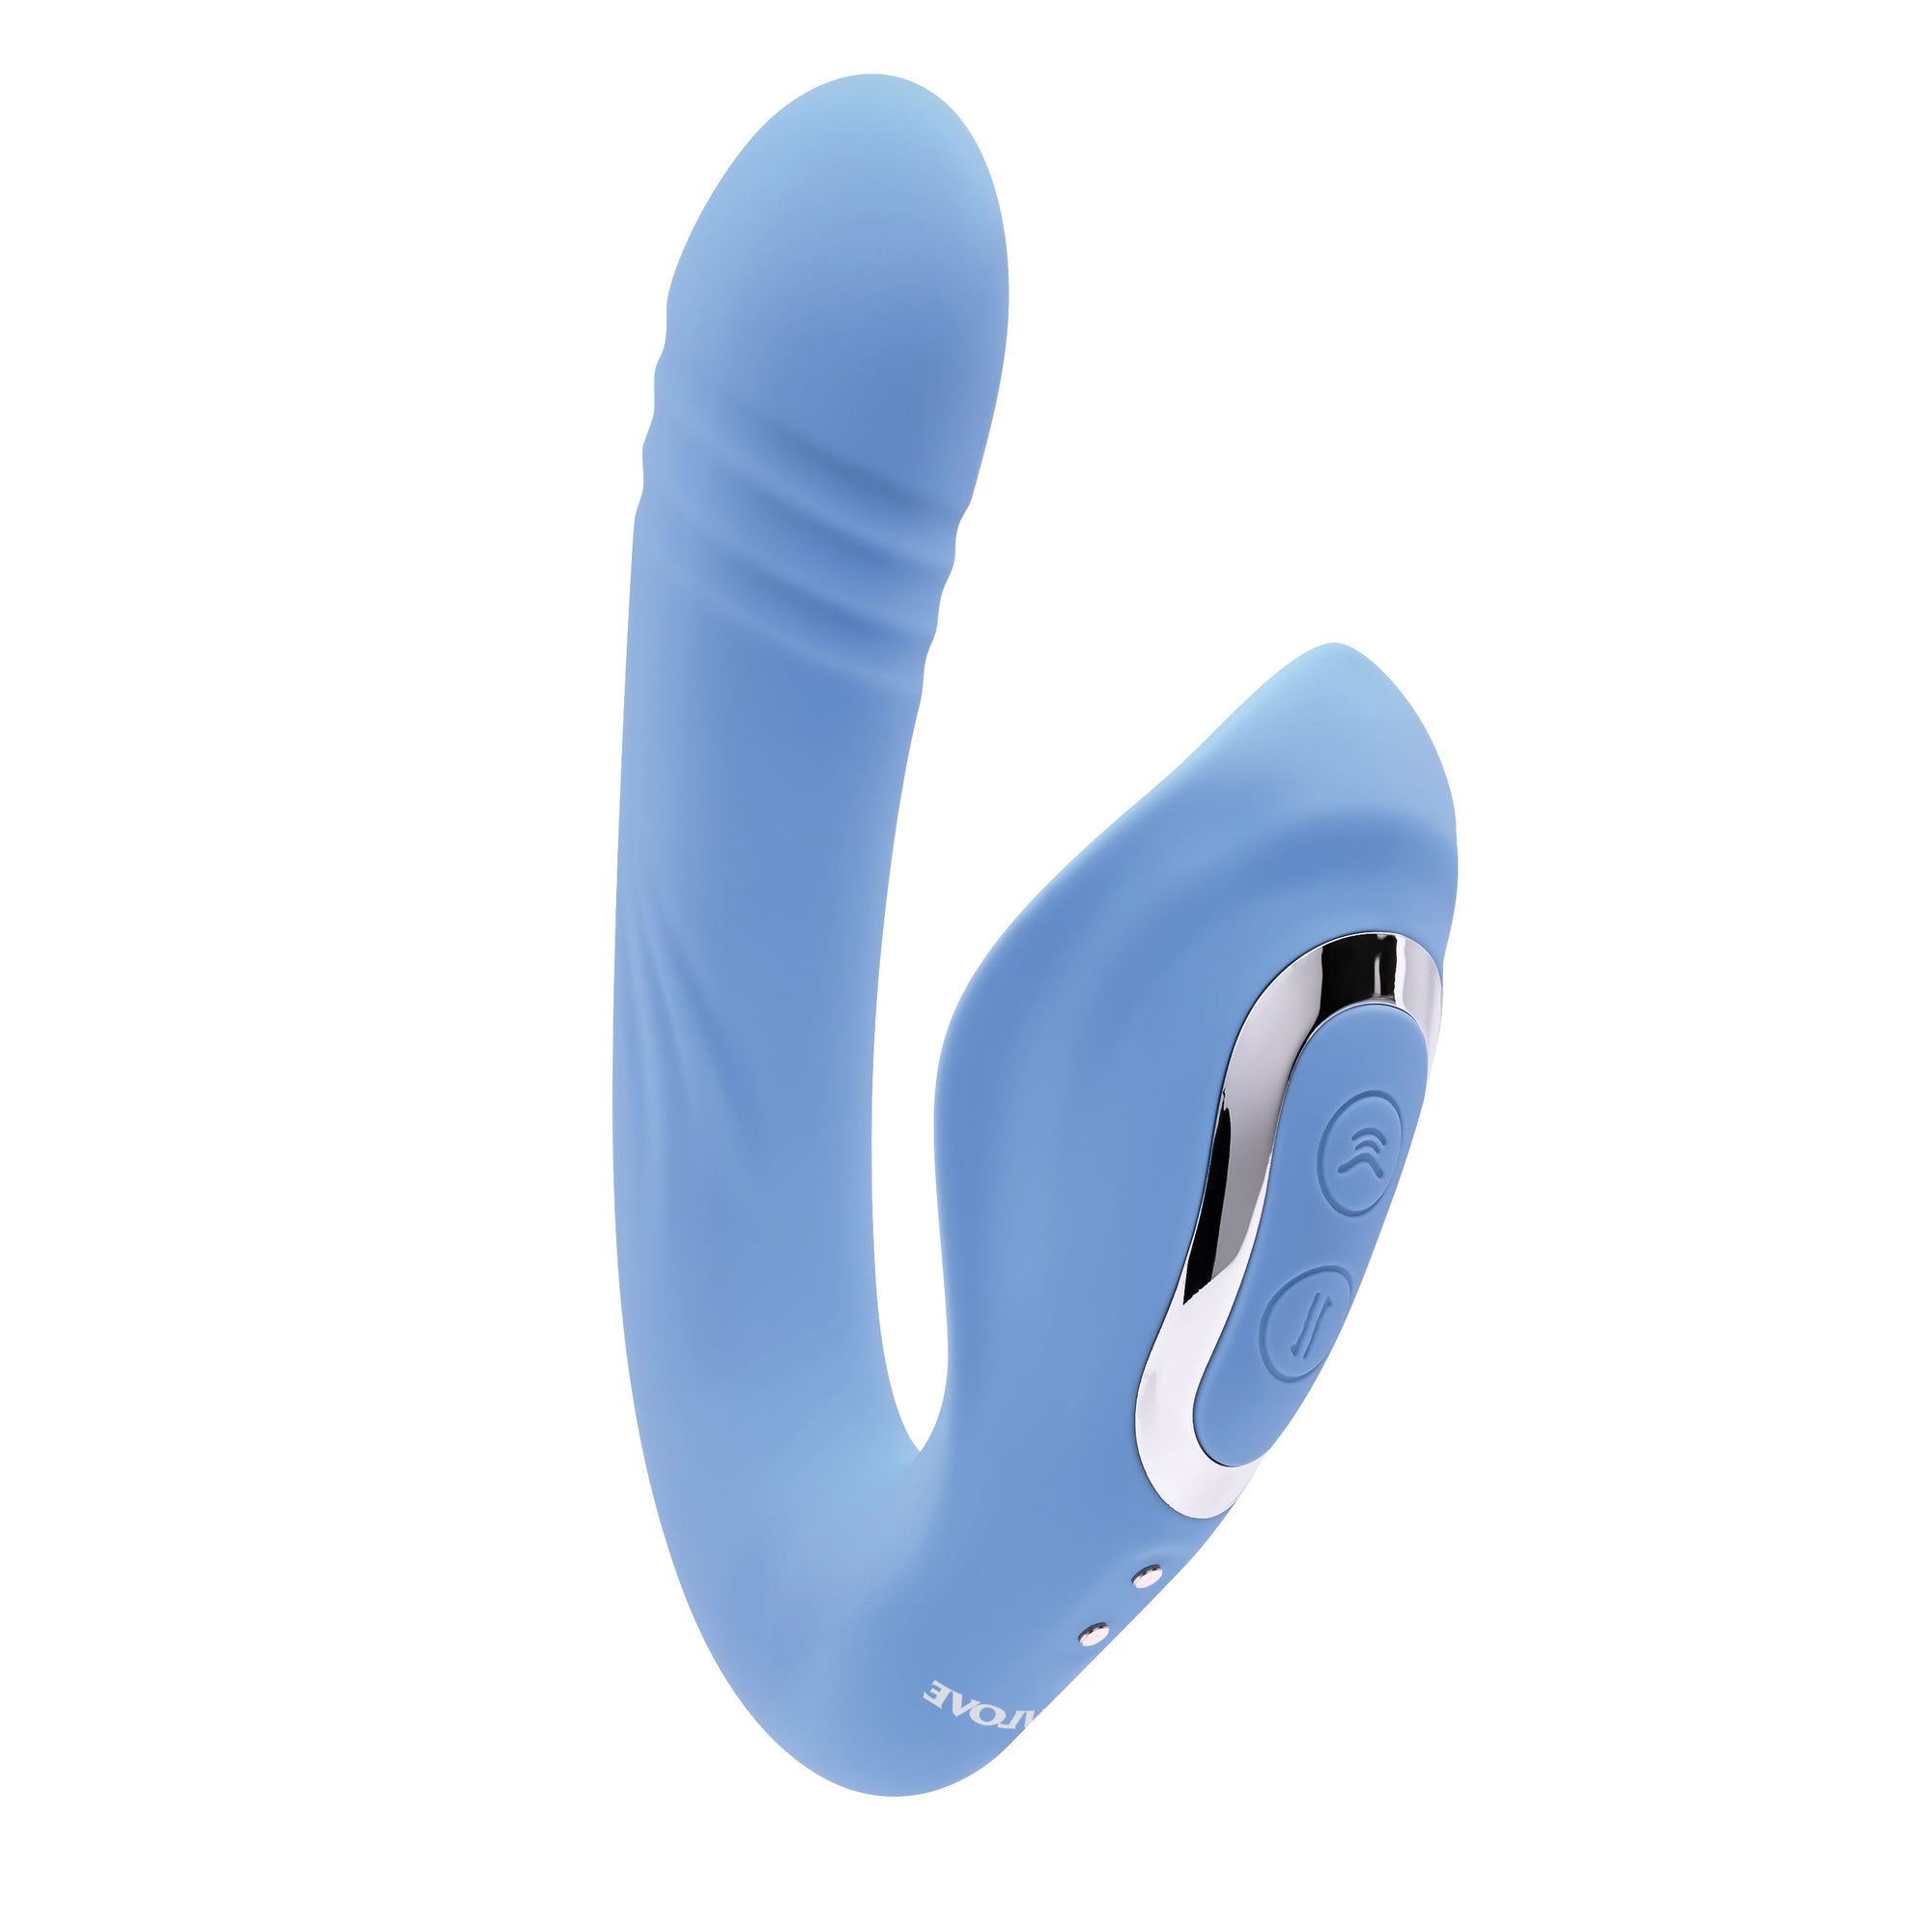 Evolved - Tap and Thrust Curved Vibrator (Blue)